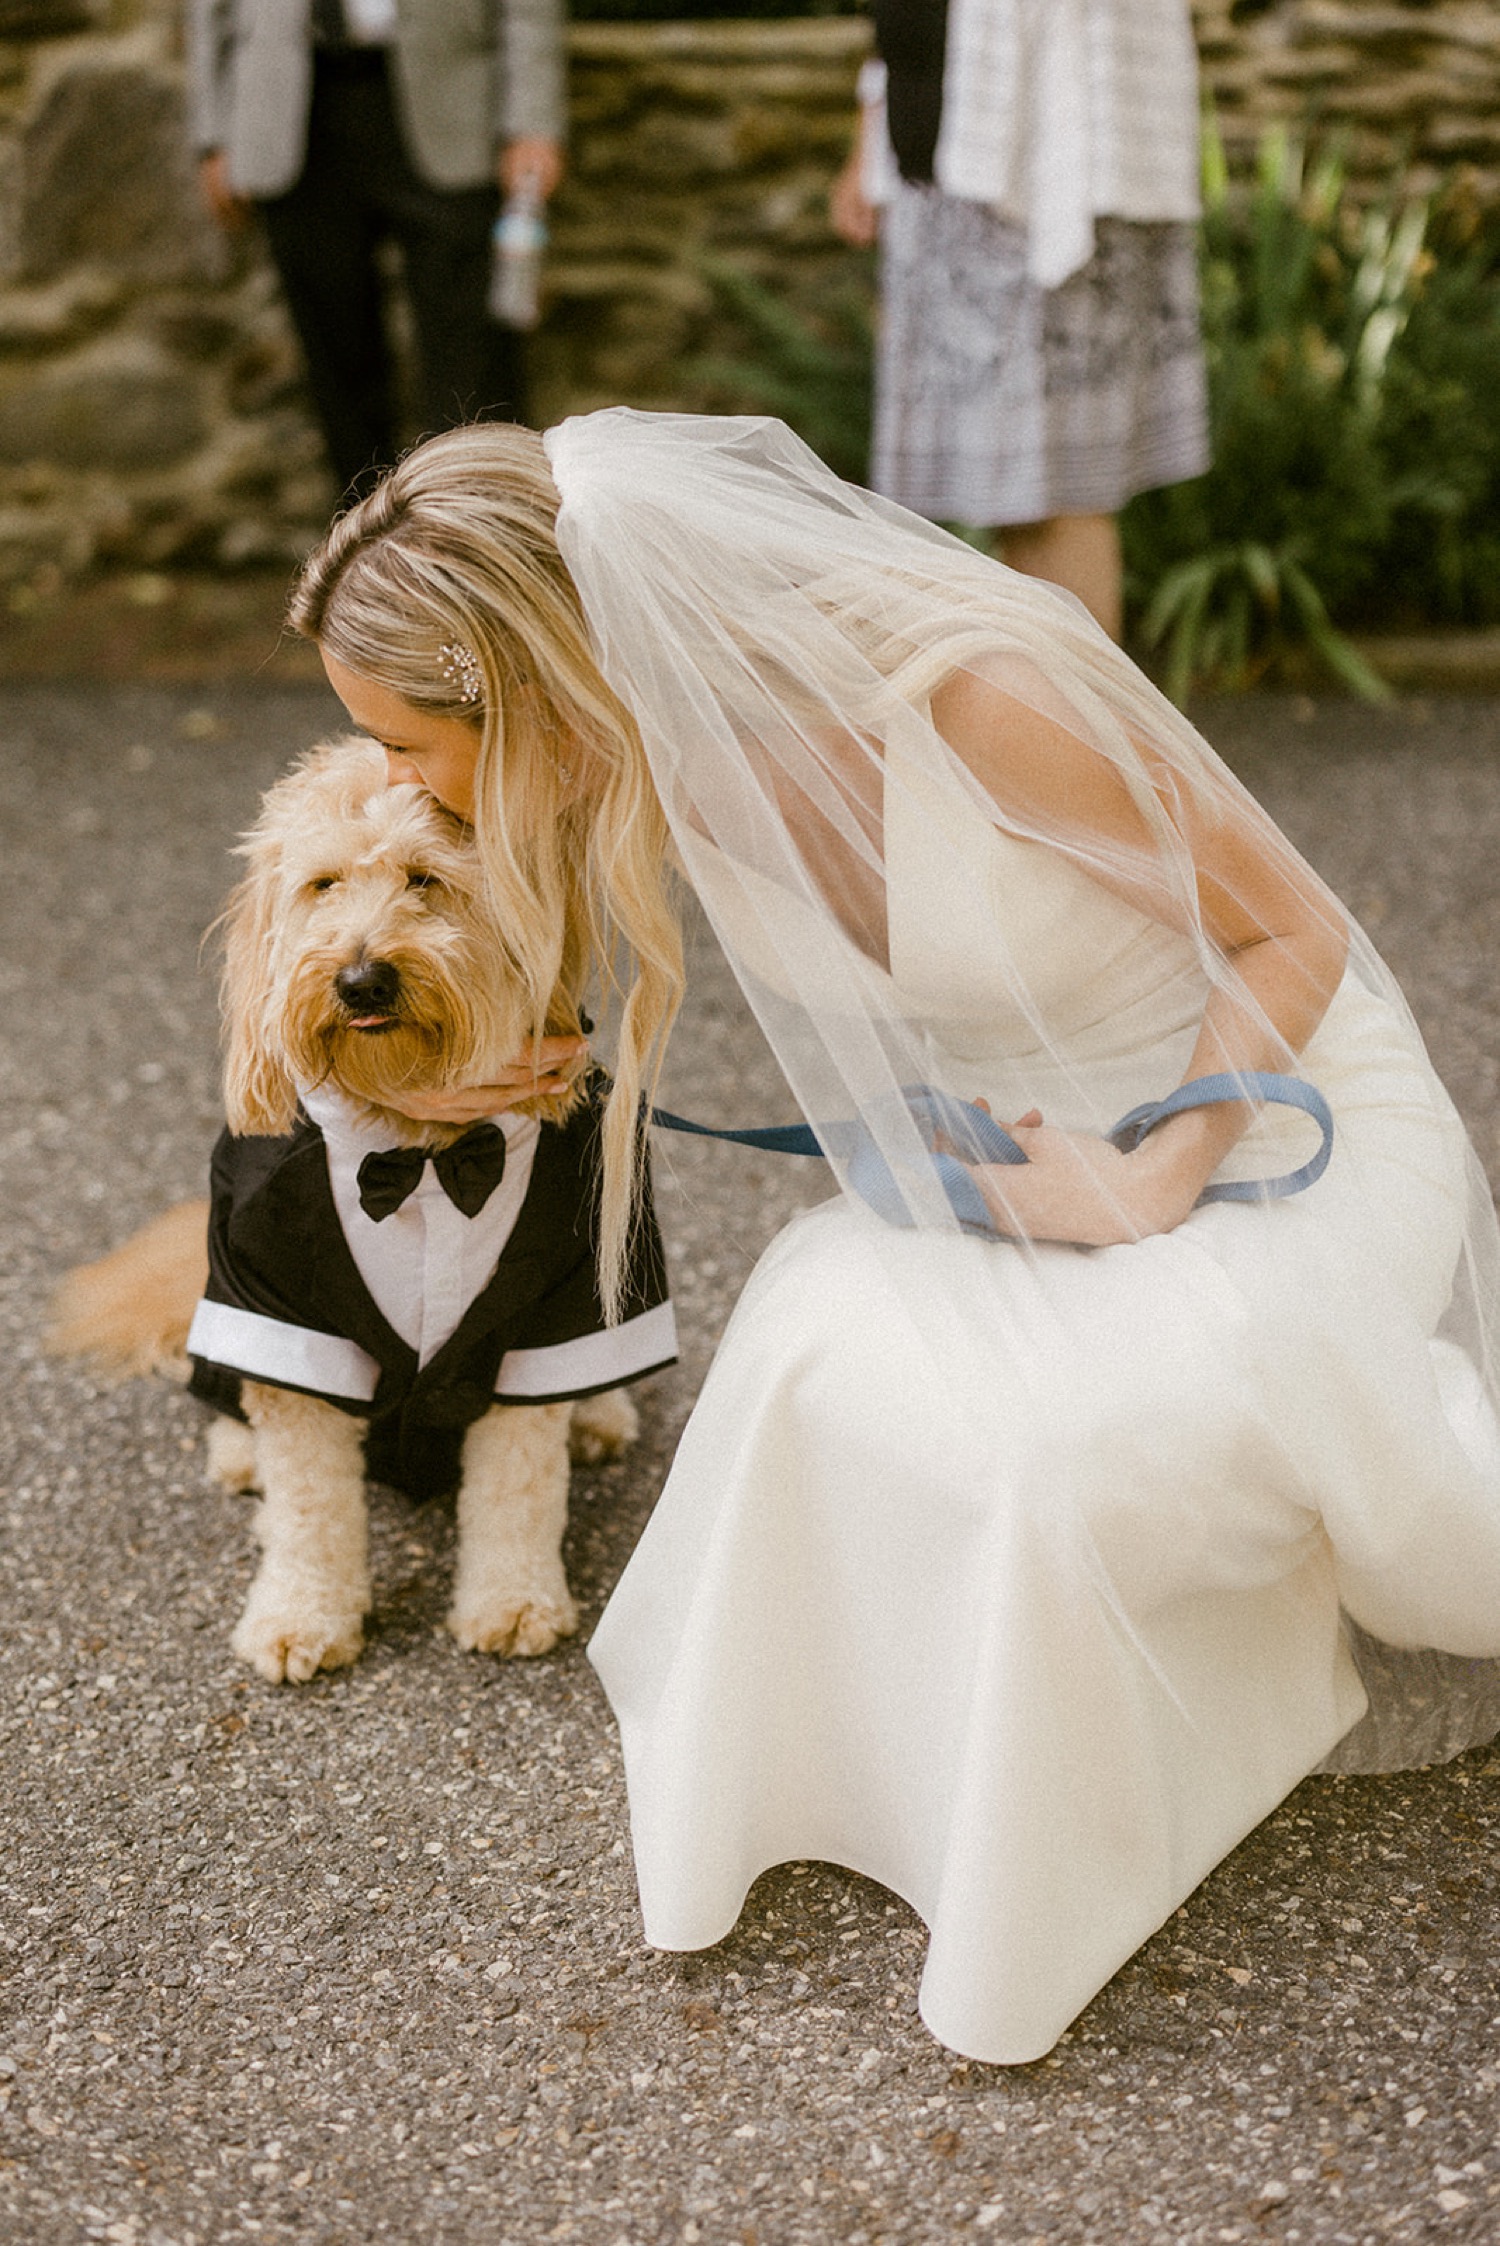 bride kissing dog in groom costume at outdoor wedding